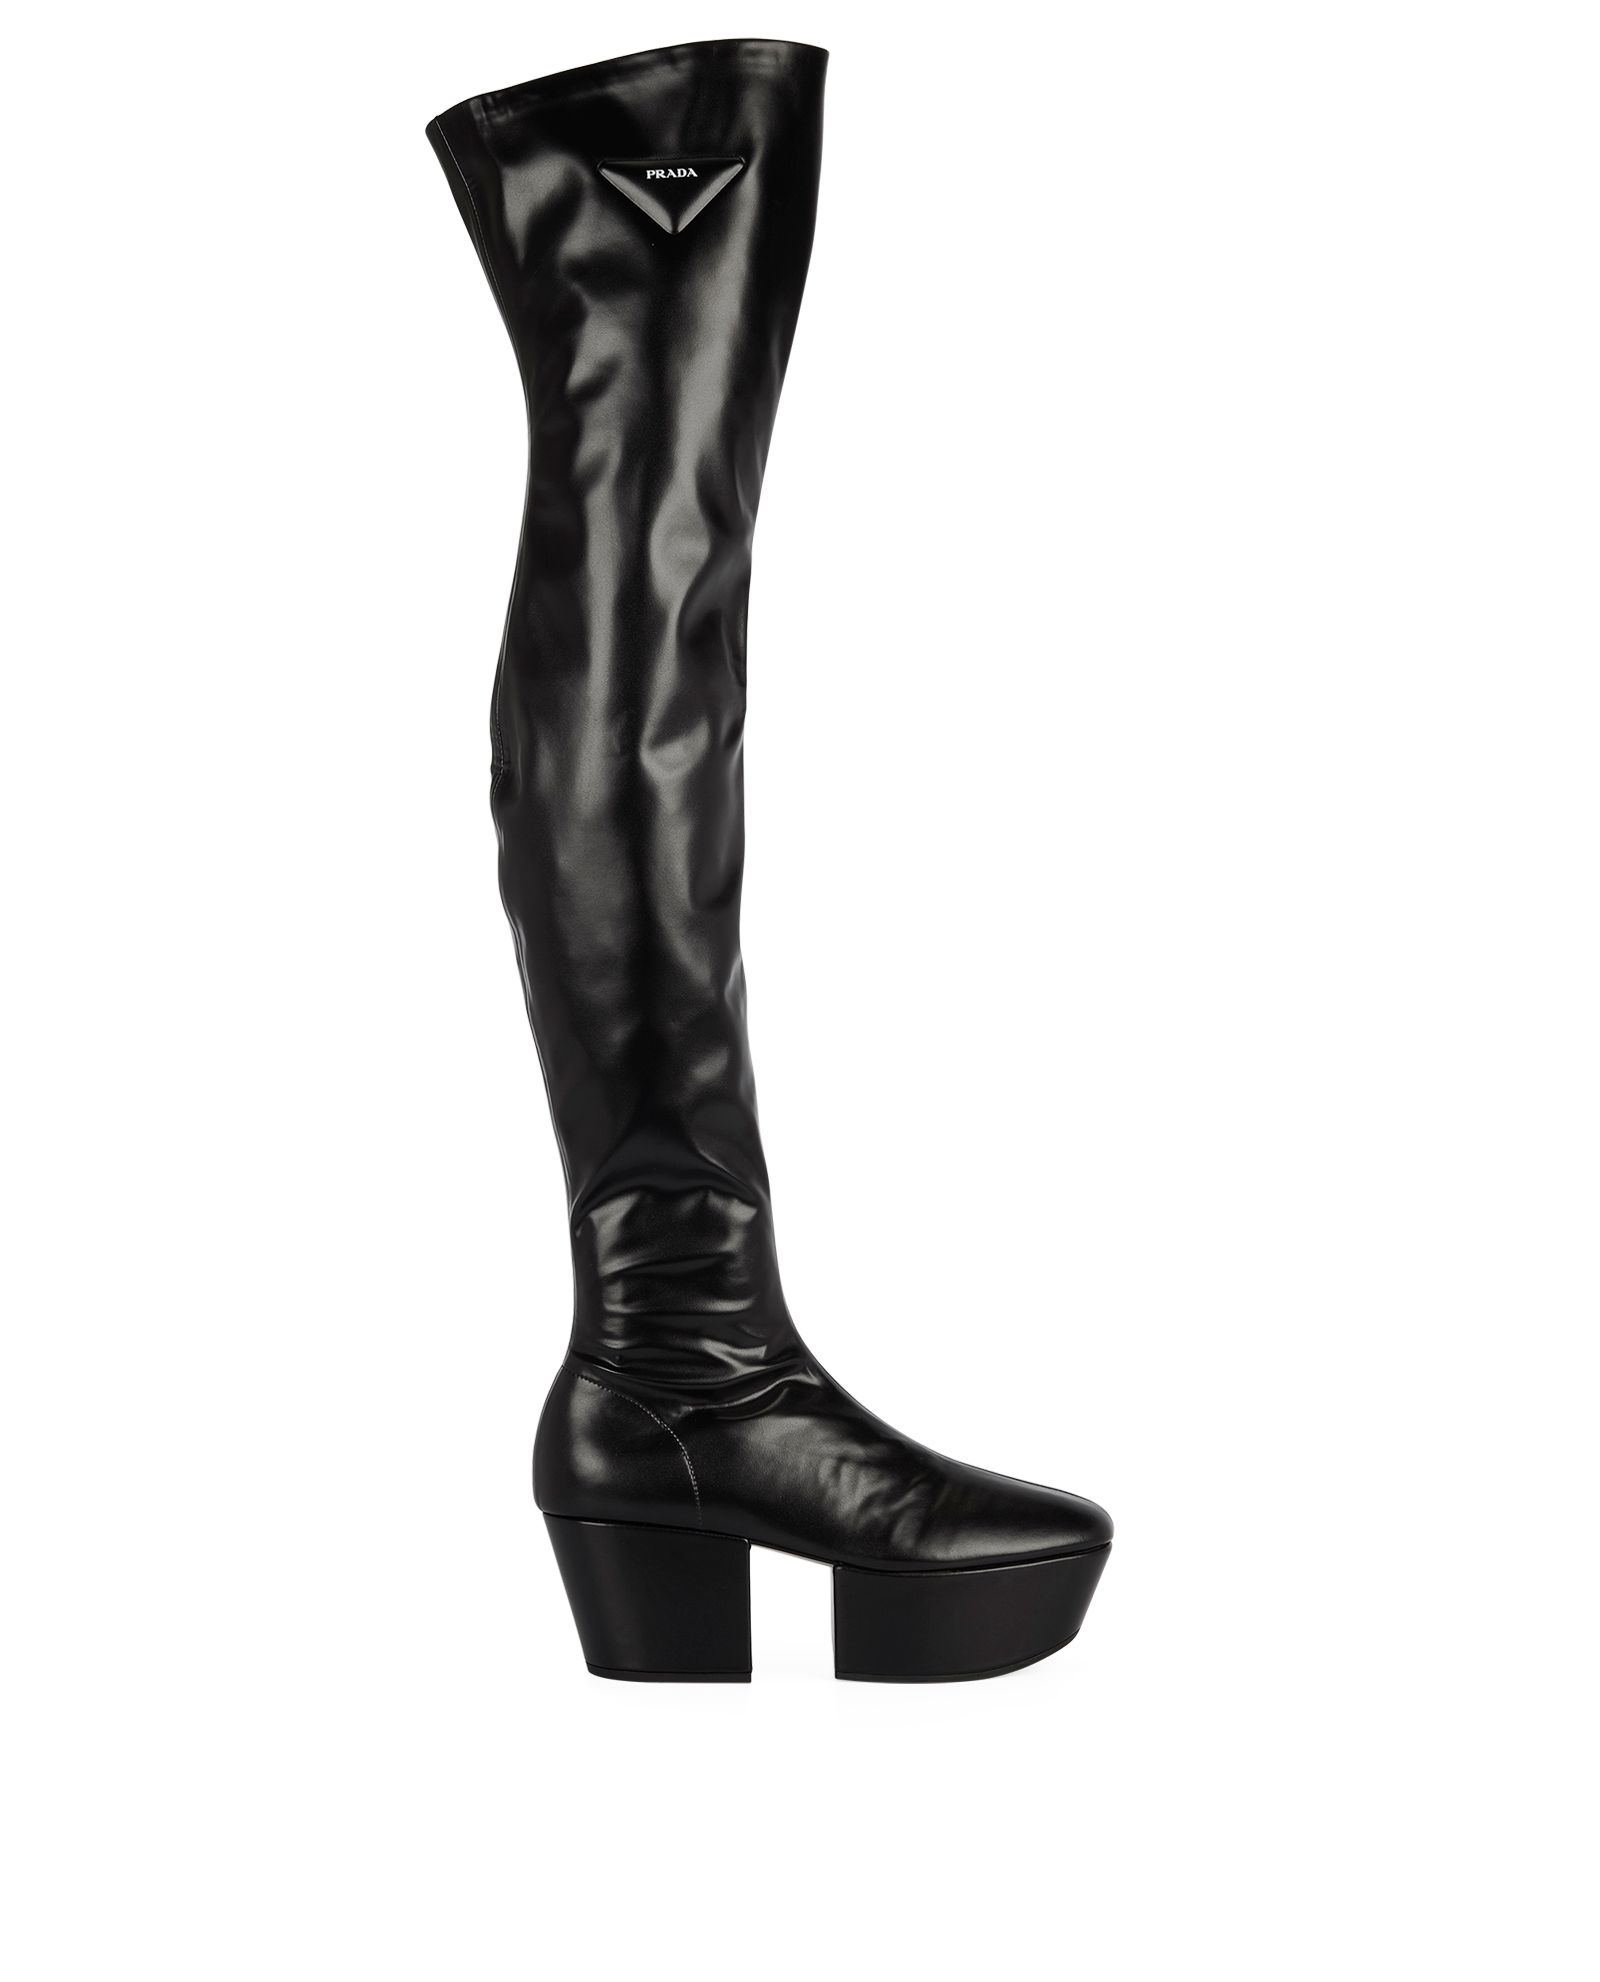 actually Cause Be surprised Prada Stivali Stretch 90MM Platform OTH Boots, Boots - Designer Exchange |  Buy Sell Exchange